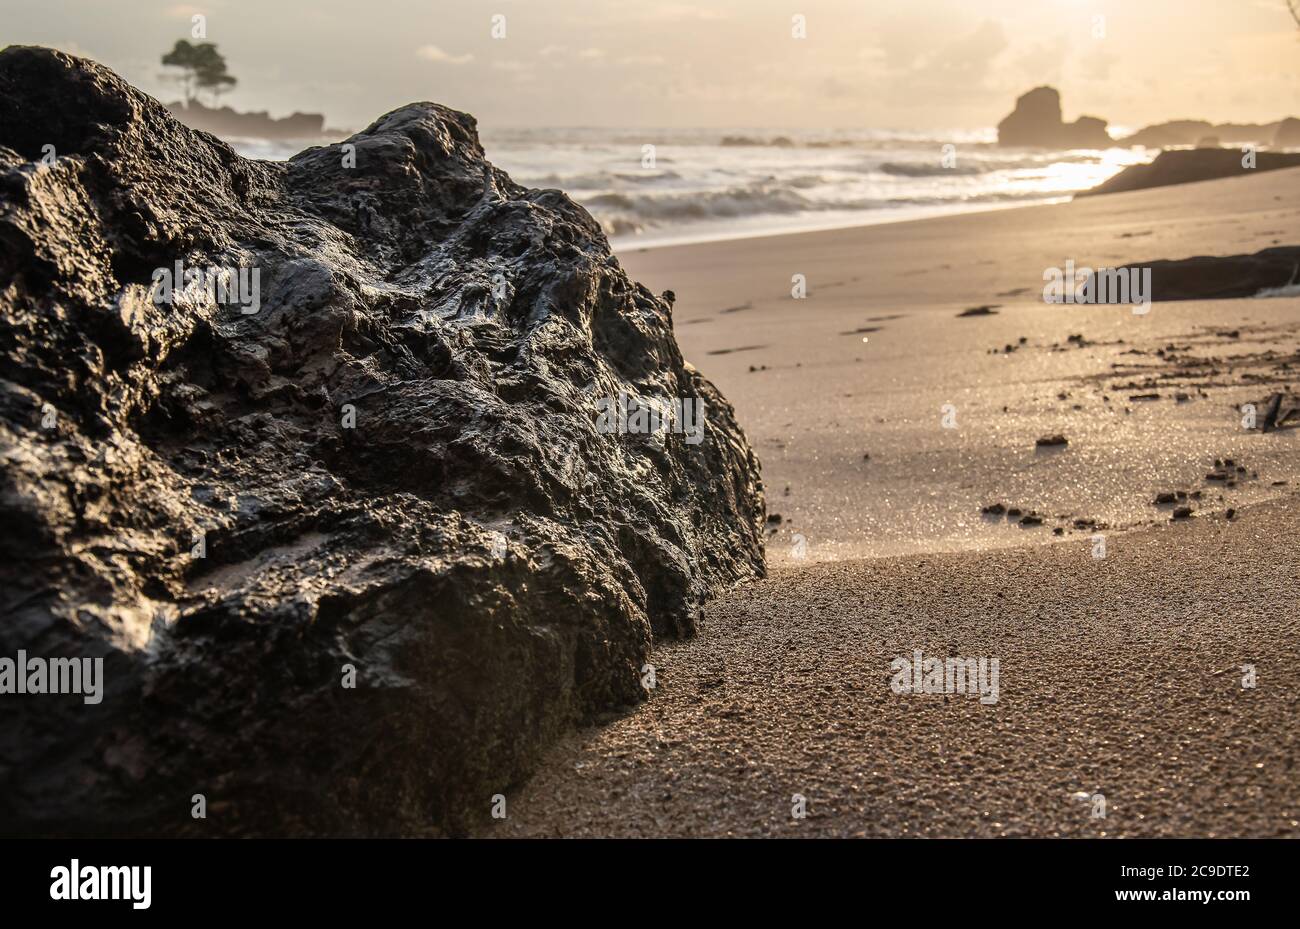 Black big rock lying on a beach in Africa's gold coast Ghana West Africa at a sunset Stock Photo